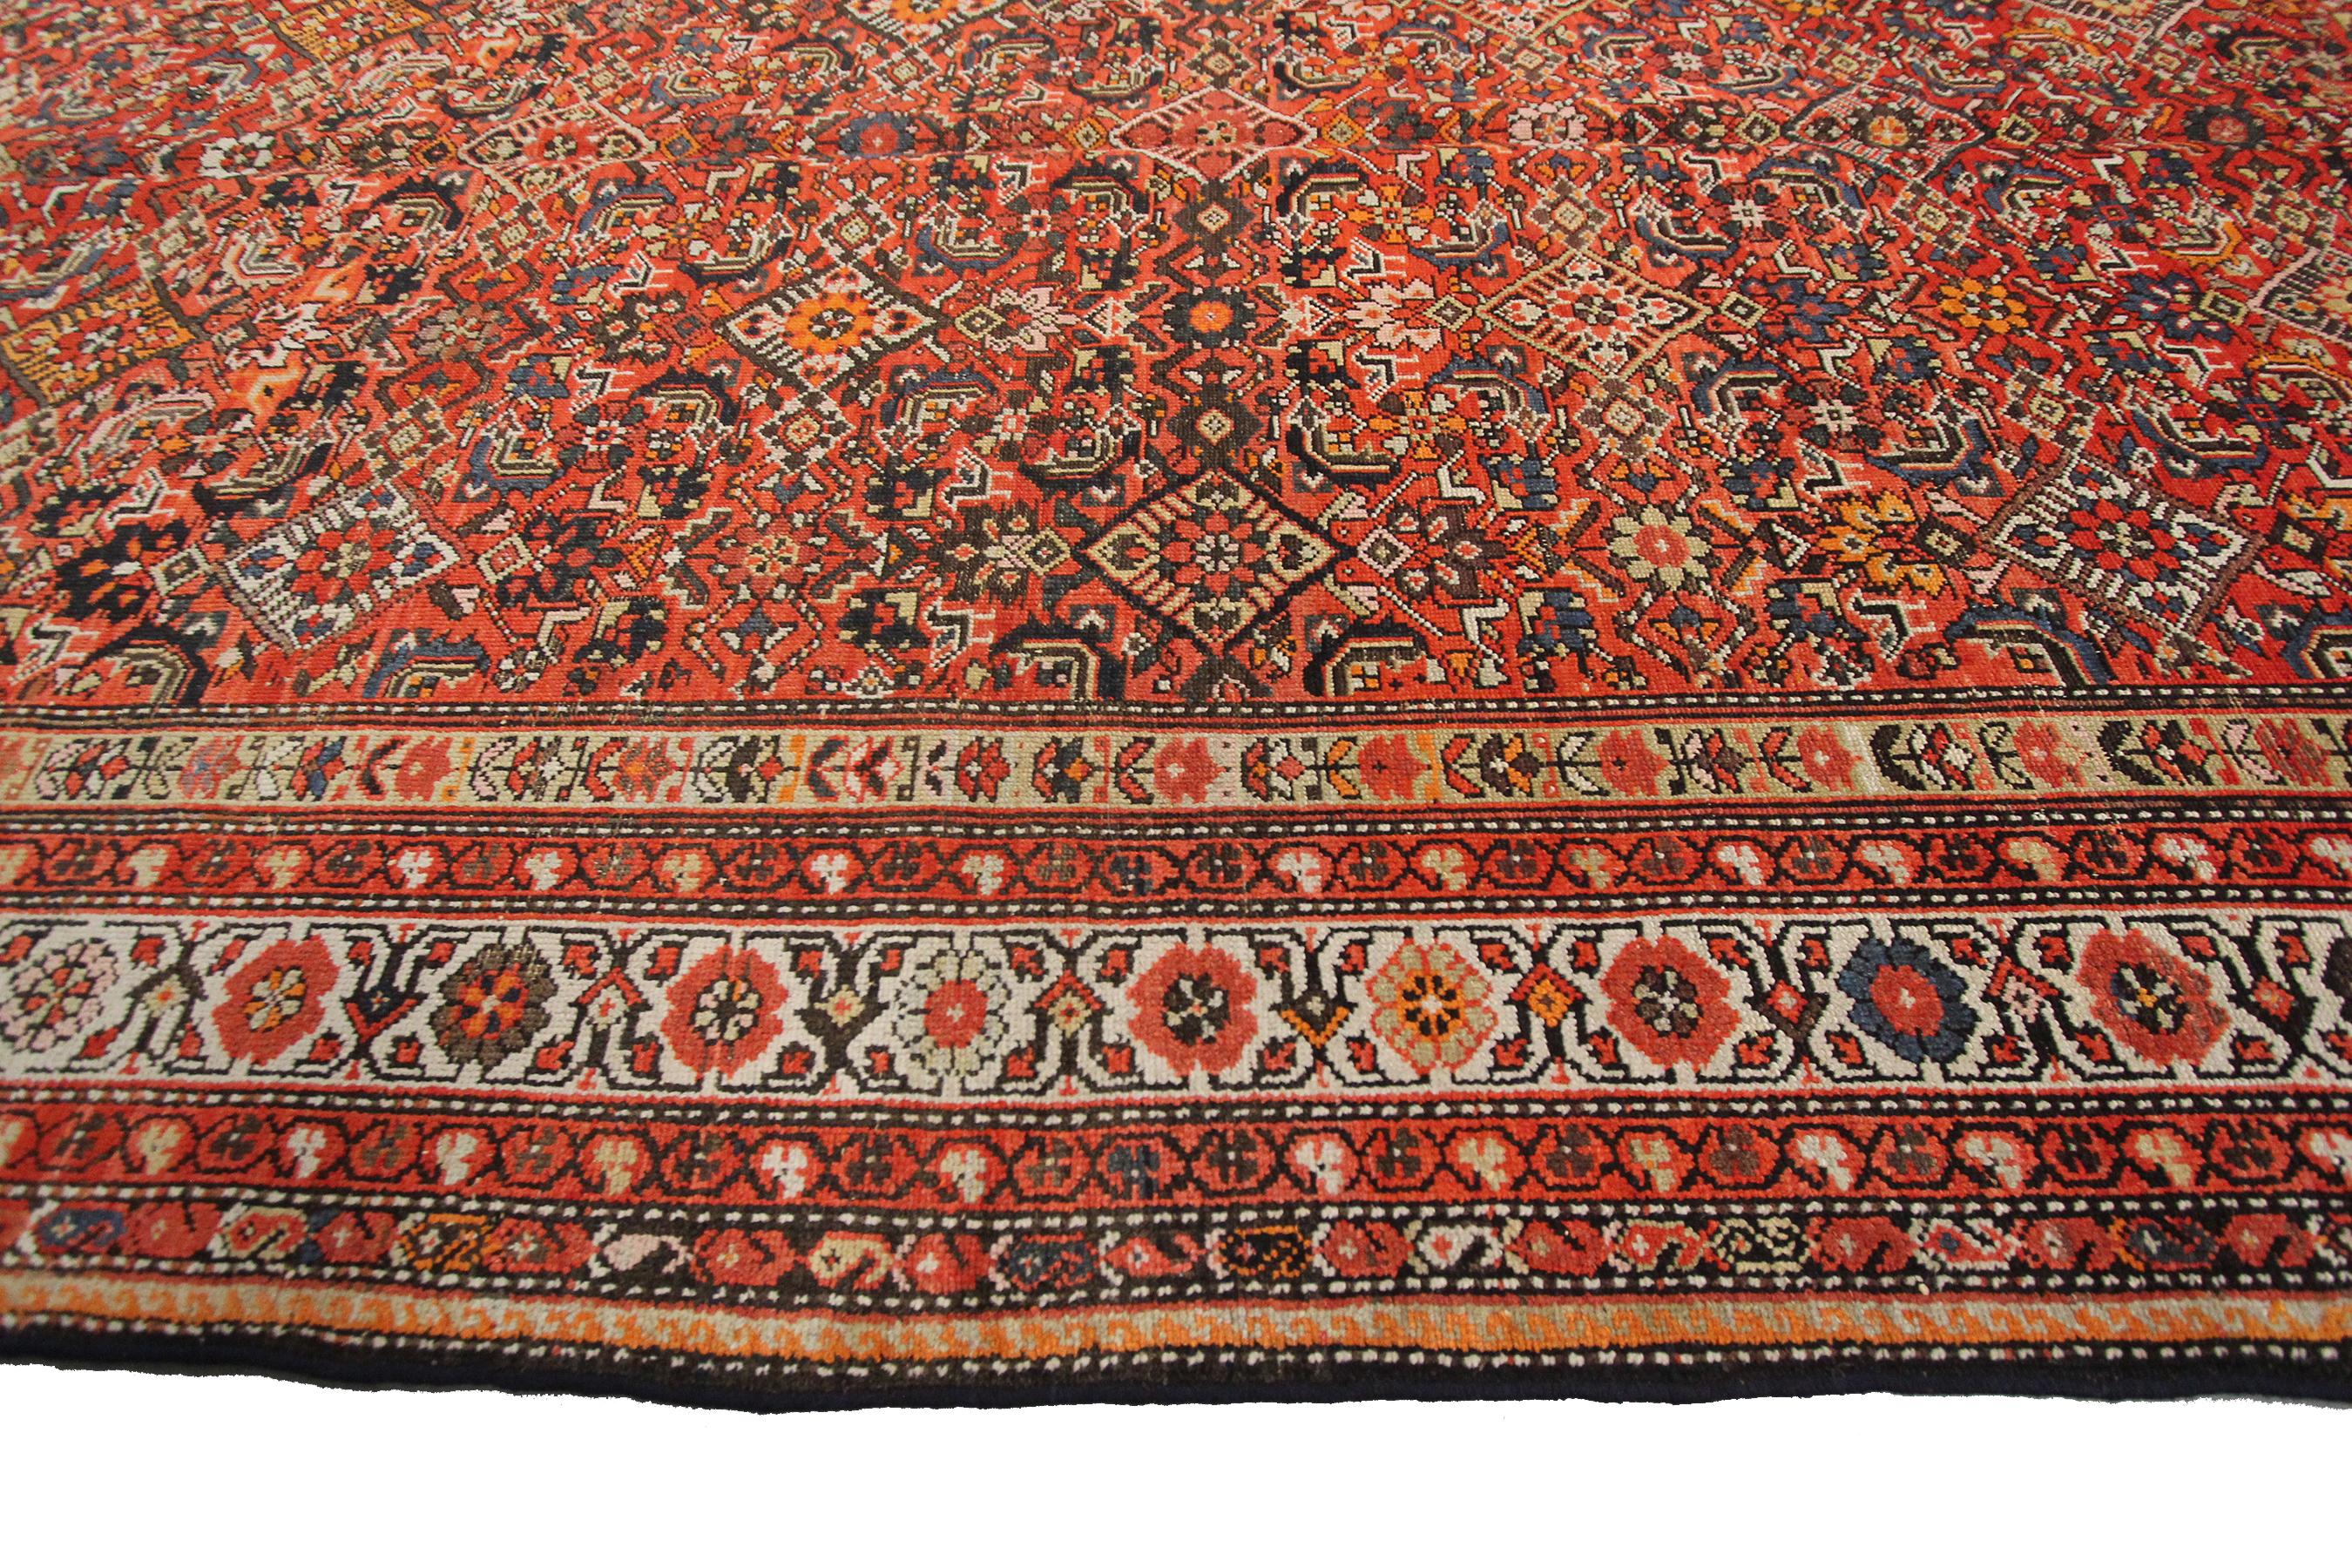 Hand-Knotted Large Antique Persian Farahan Rug Antique Farahan Persian Rug Overall 6x14 For Sale